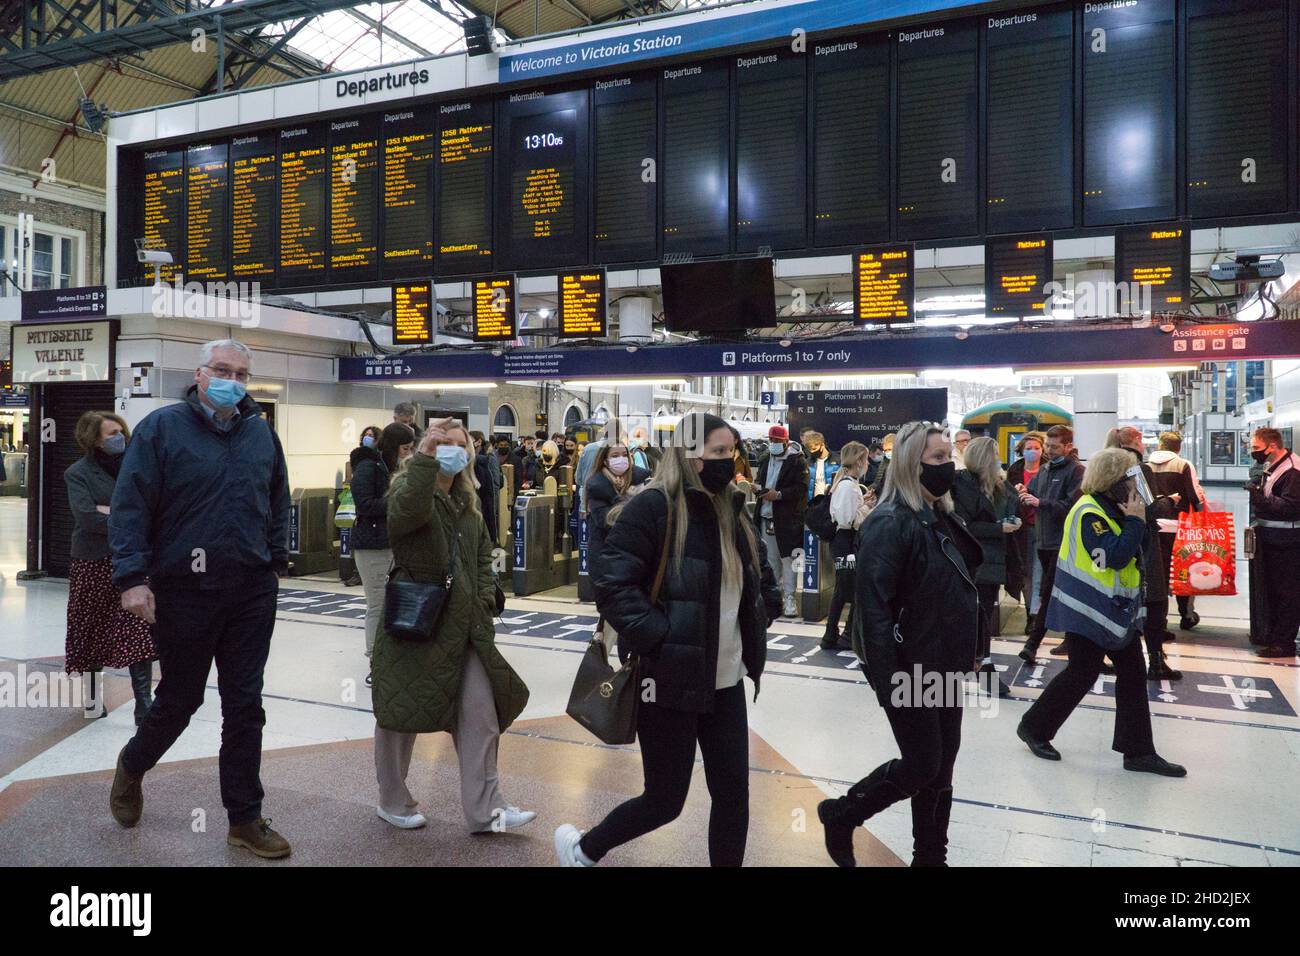 London, UK, 2 January 2022: Passengers arriving into Victoria Station are among the lucky ones who haven't had their trains cancelled due to staff shortages caused by the rapid spread of the omicron variant of coronavirus. Anna Watson/Alamy Live News Stock Photo